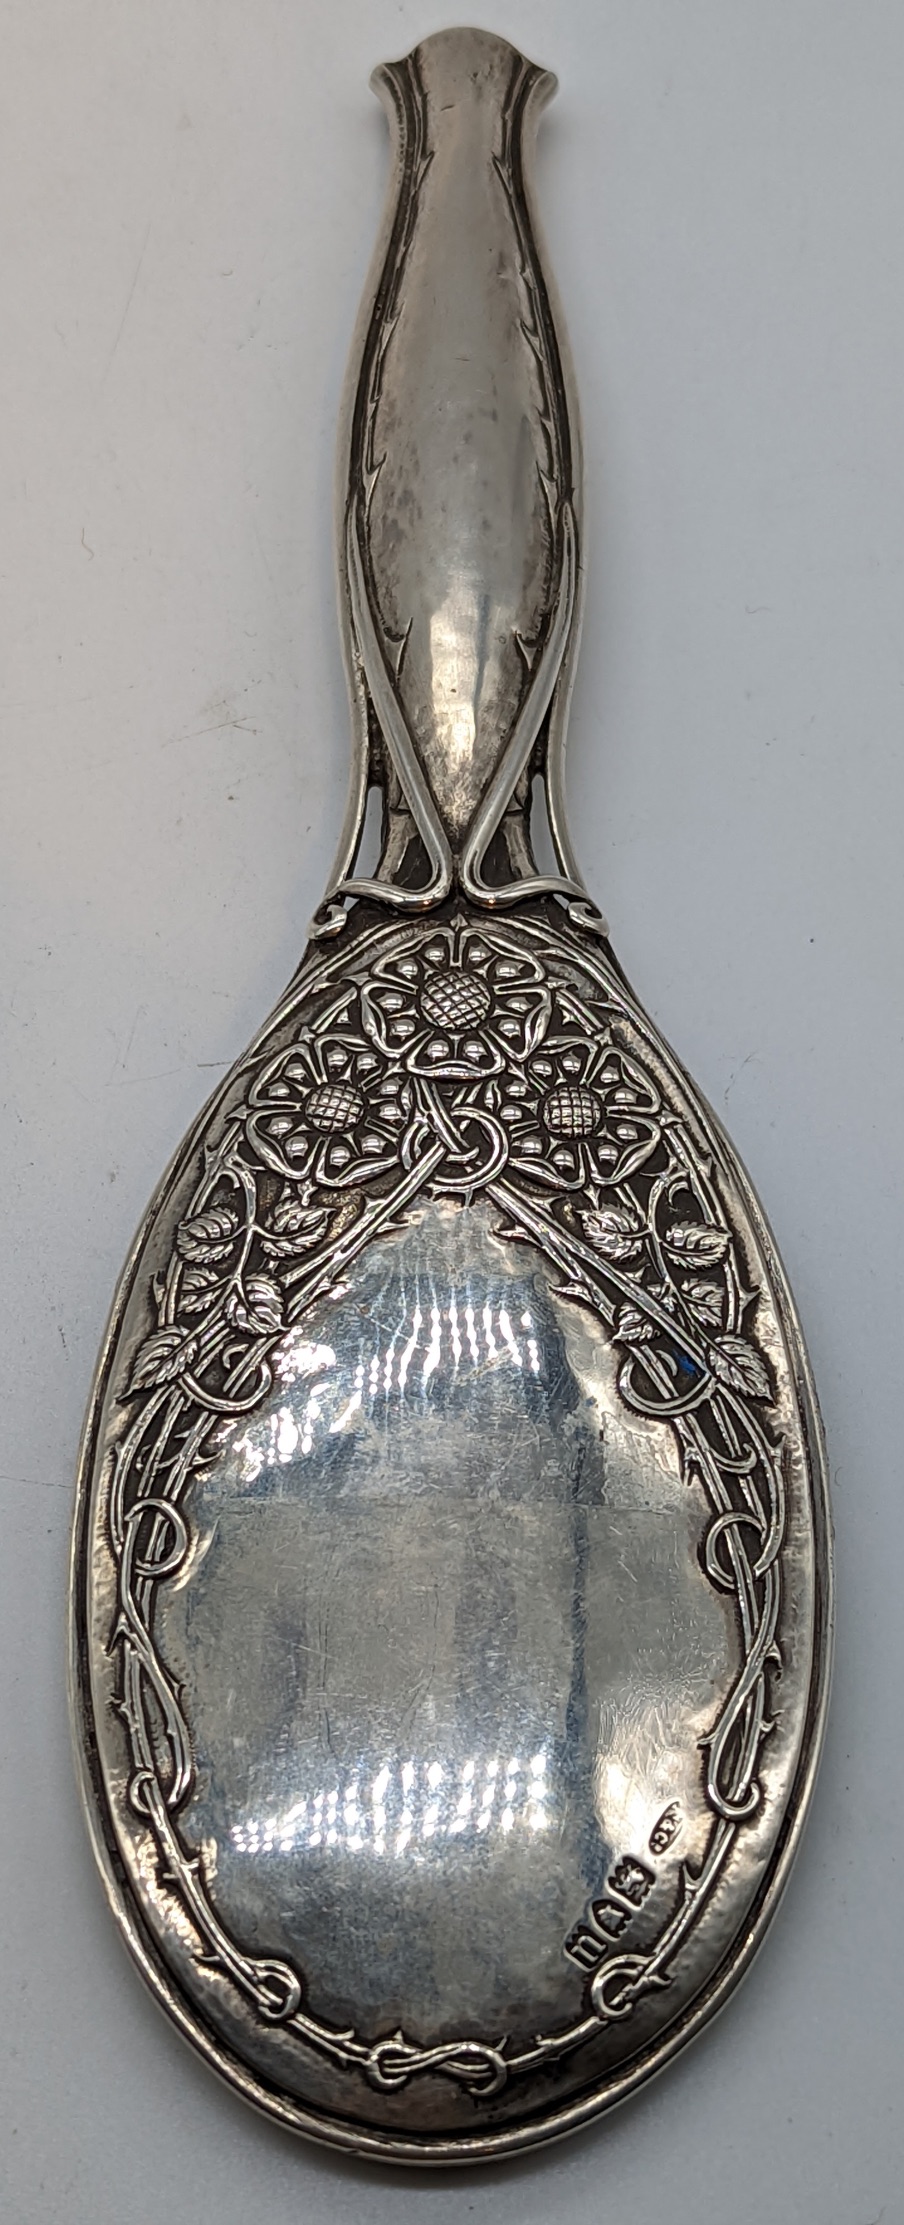 An Arts and Crafts Omar Ramsden & Alwyn Carr silver hand mirror, decorated with roses and thorns,